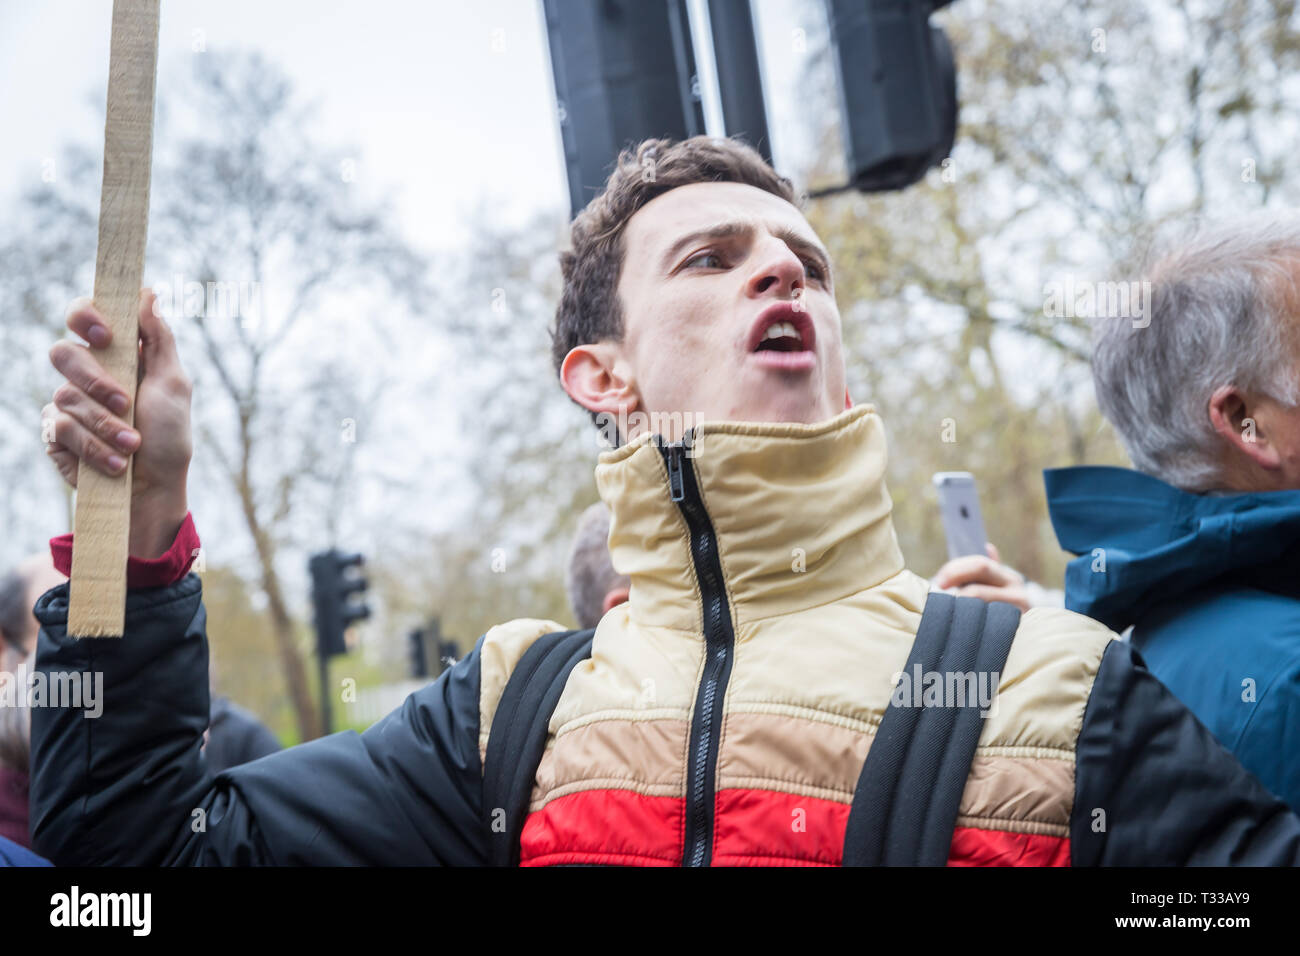 Protest outside The Dorchester hotel in London against the new Brunei anti-gay laws - 6 Apr 2019 Stock Photo